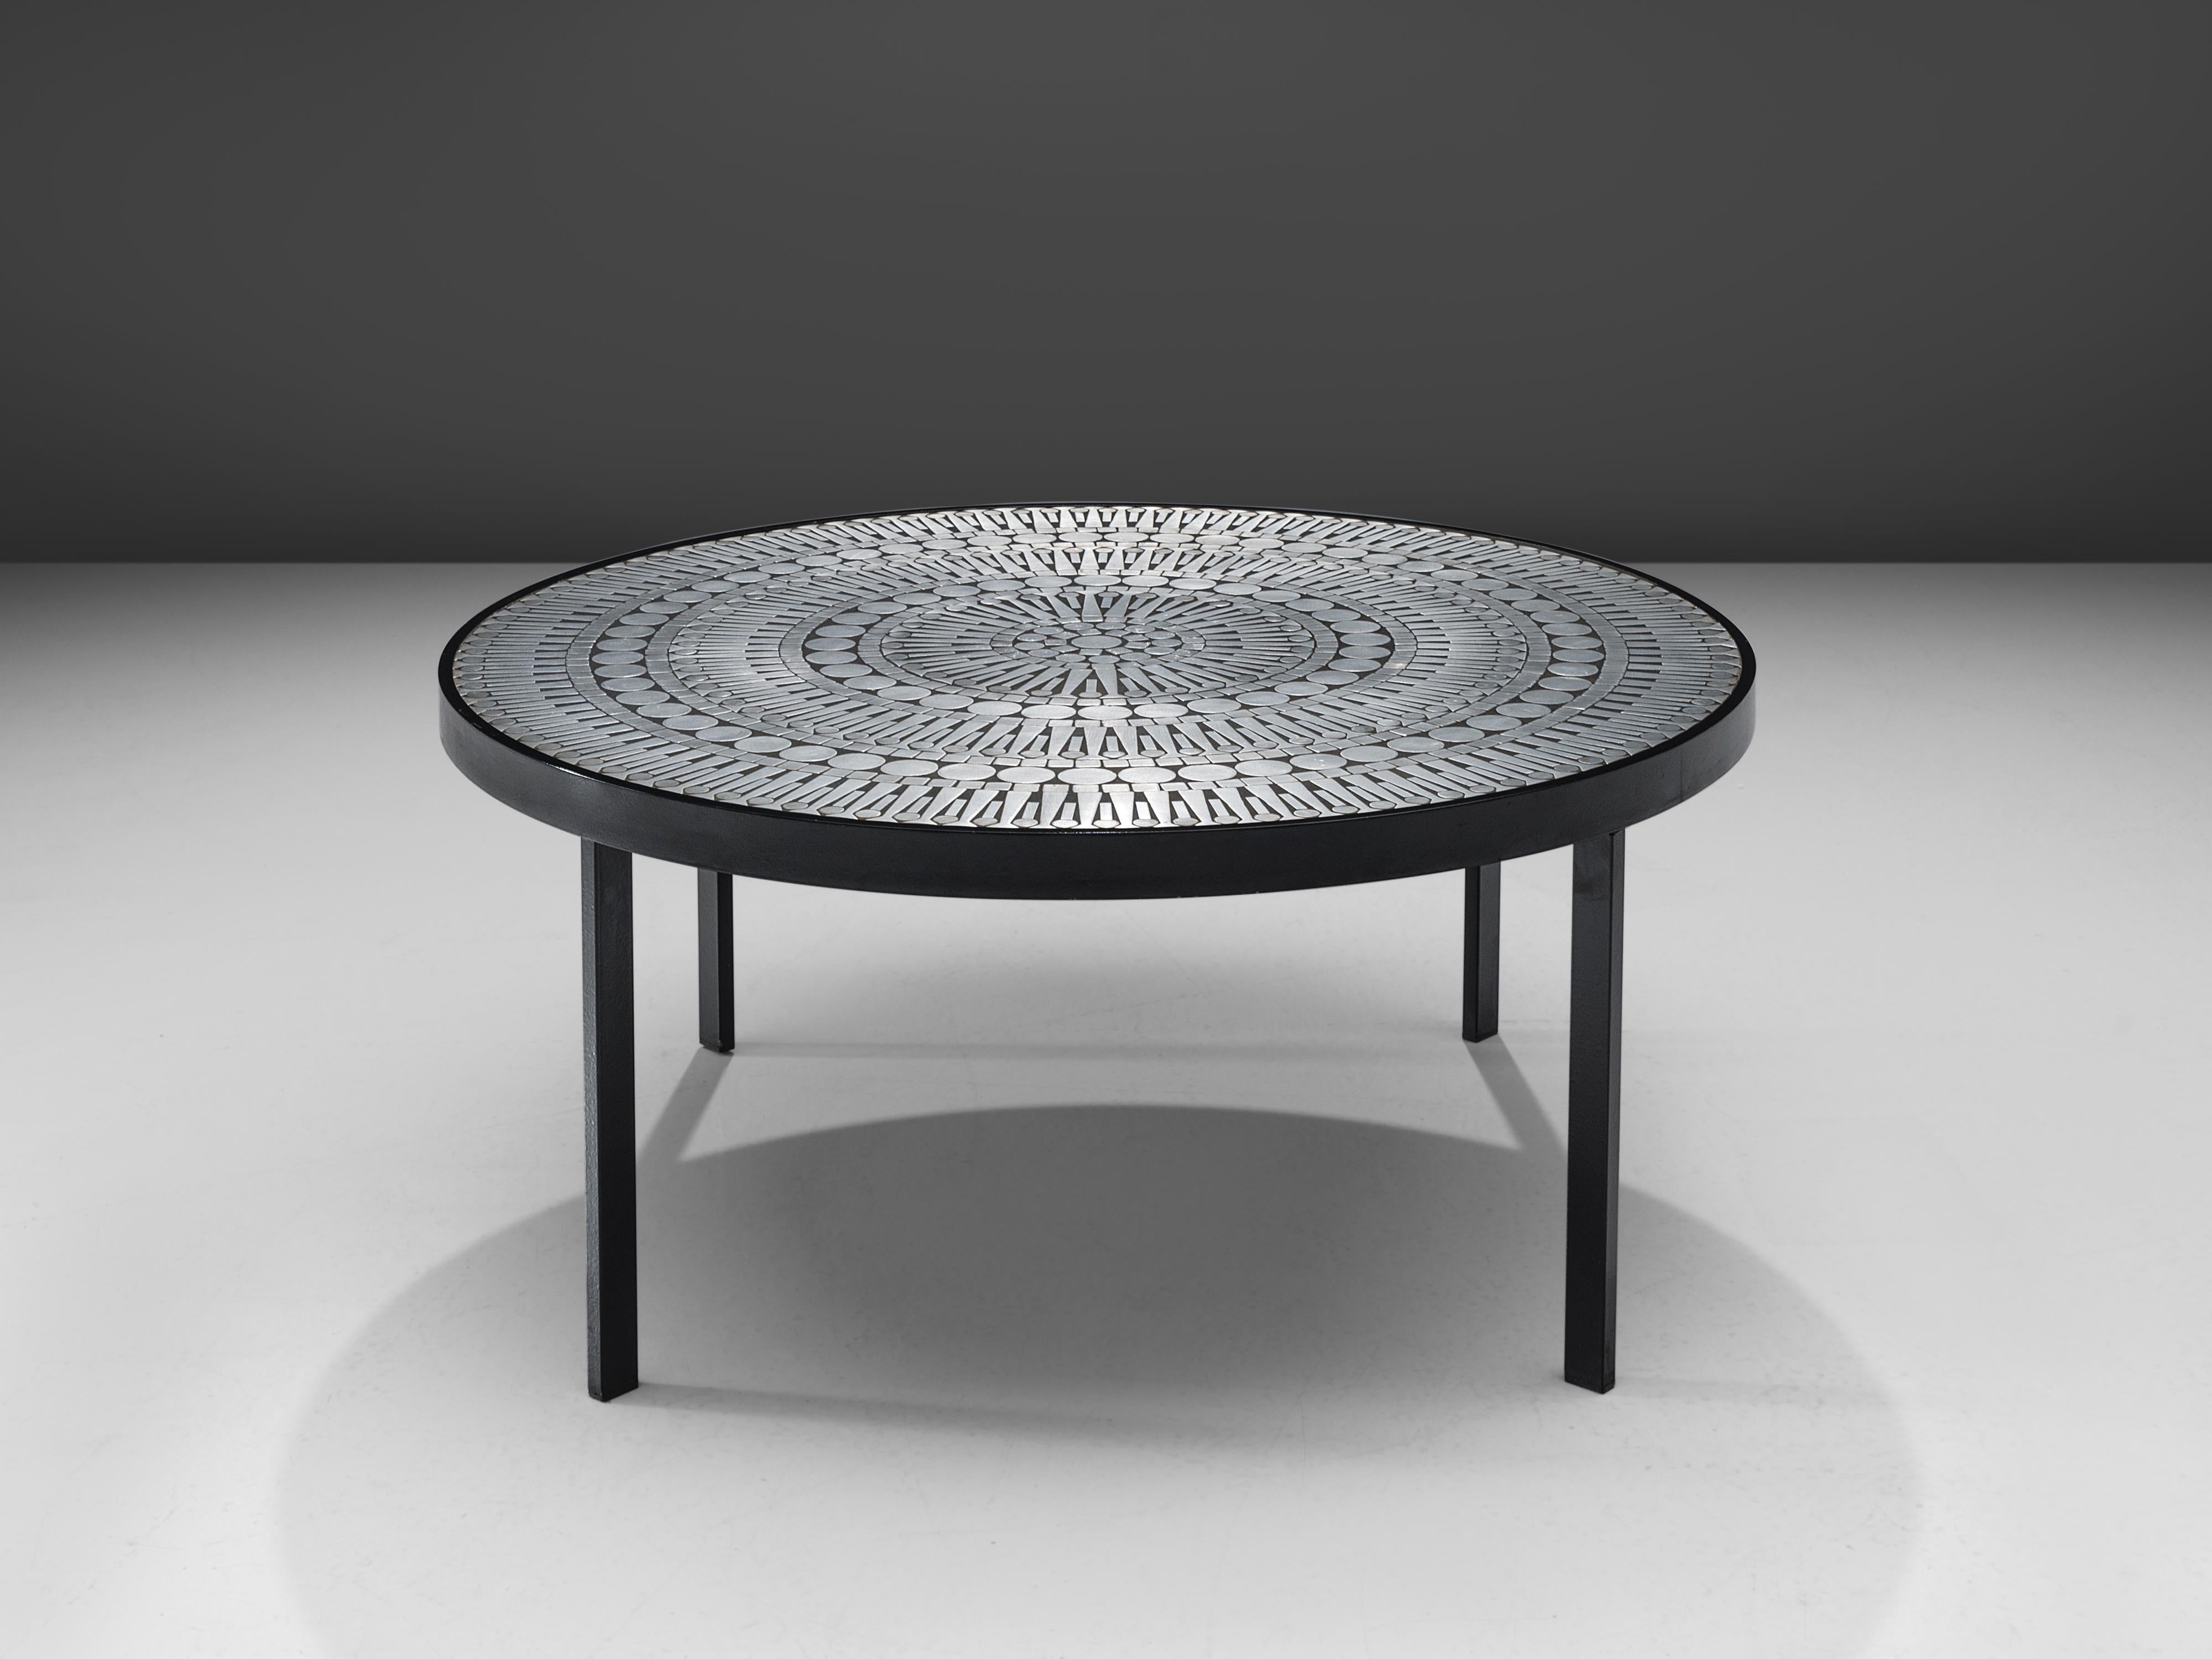 Raf Verjans, table, aluminum, resin, enameled steel, Belgium, 1970s

This cocktail table is designed by the Belgian designer Raf Verjans. The table has a perfectly executed aluminum mosaic that is inlayed in resin and framed with enameled steel. The